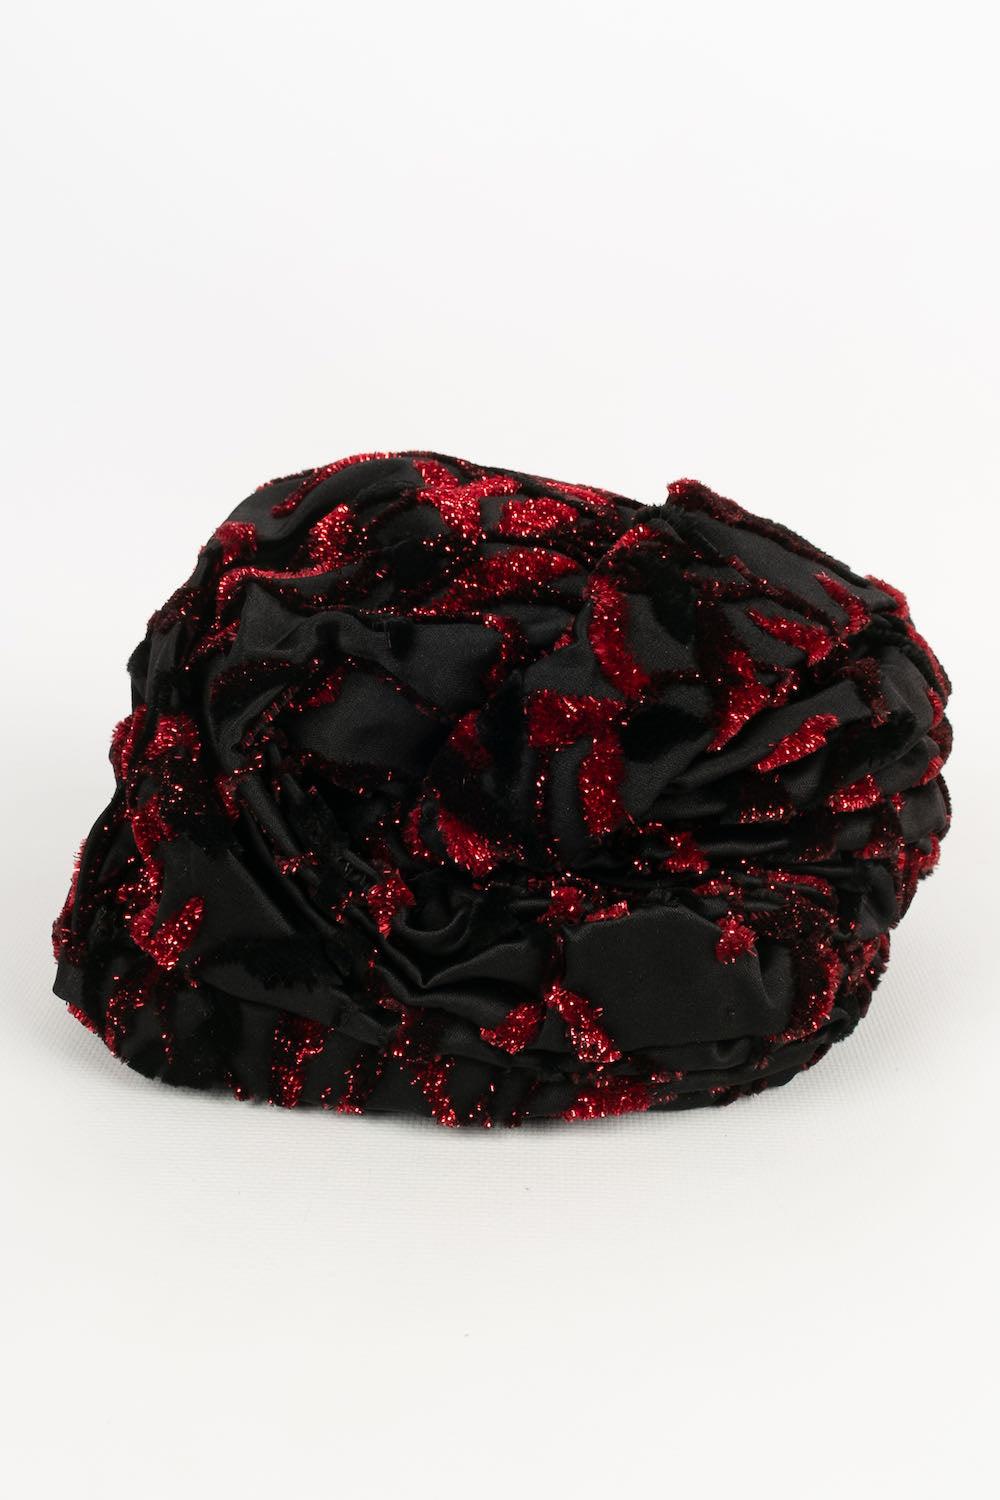 Dior - Black silk and red velvet hat. Very good condition, to note slight discoloration inside.

Additional information: 
Dimensions: Head size: 55 cm
Condition: Very good condition
Seller Ref number: CHP50